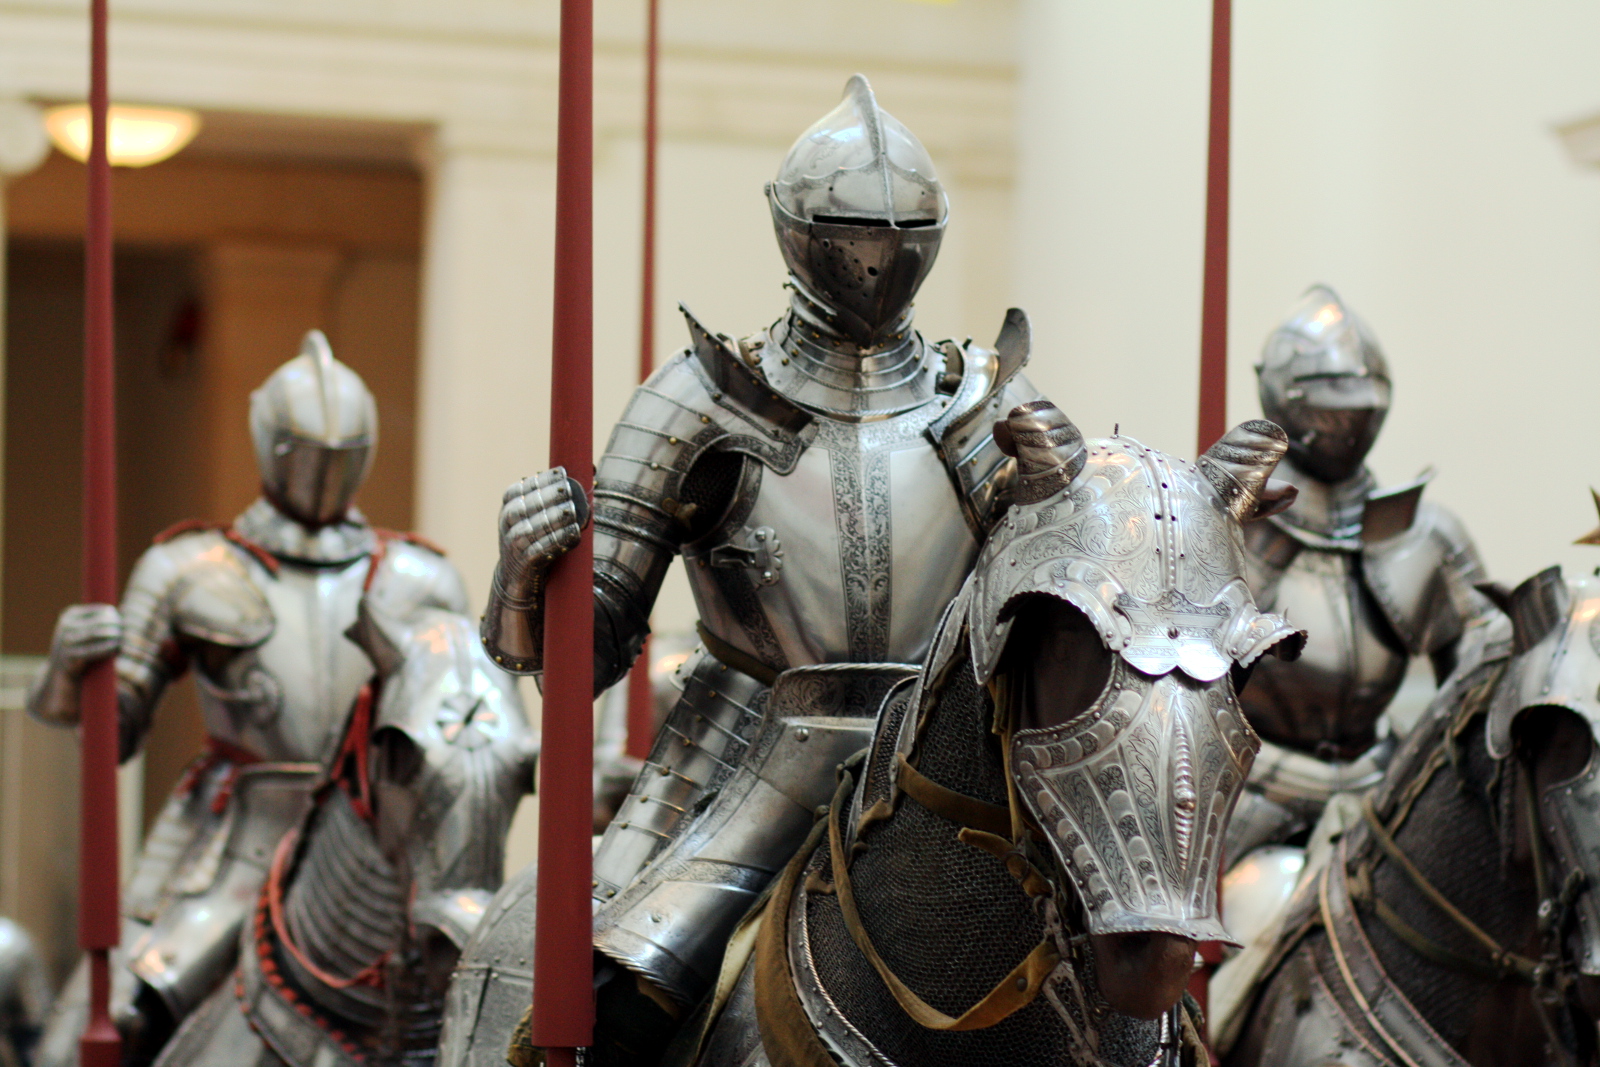 medieval england knights